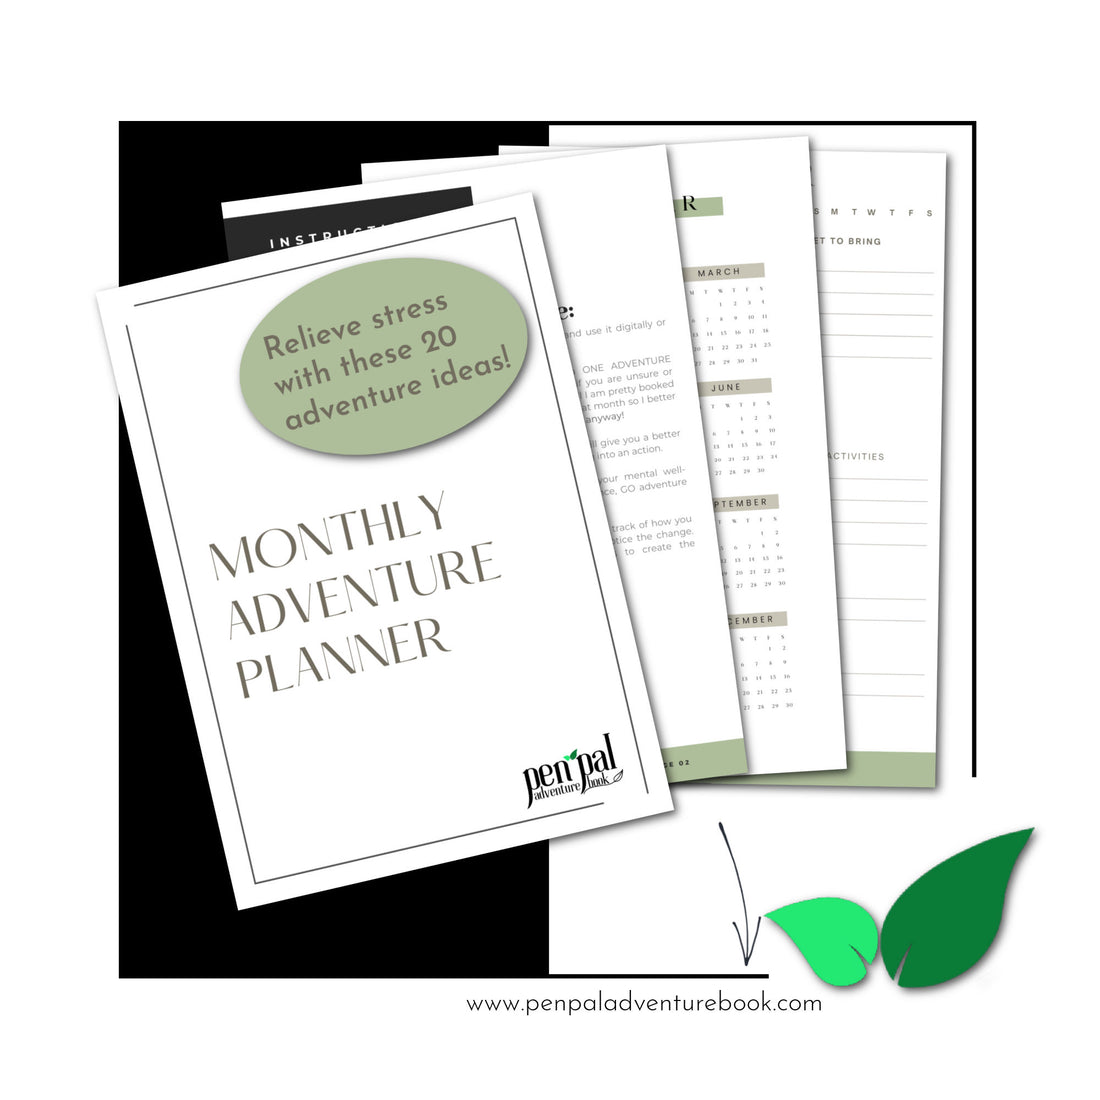 FREE Monthly Adventure Planner with 20 Stress Relieving Adventure Ideas